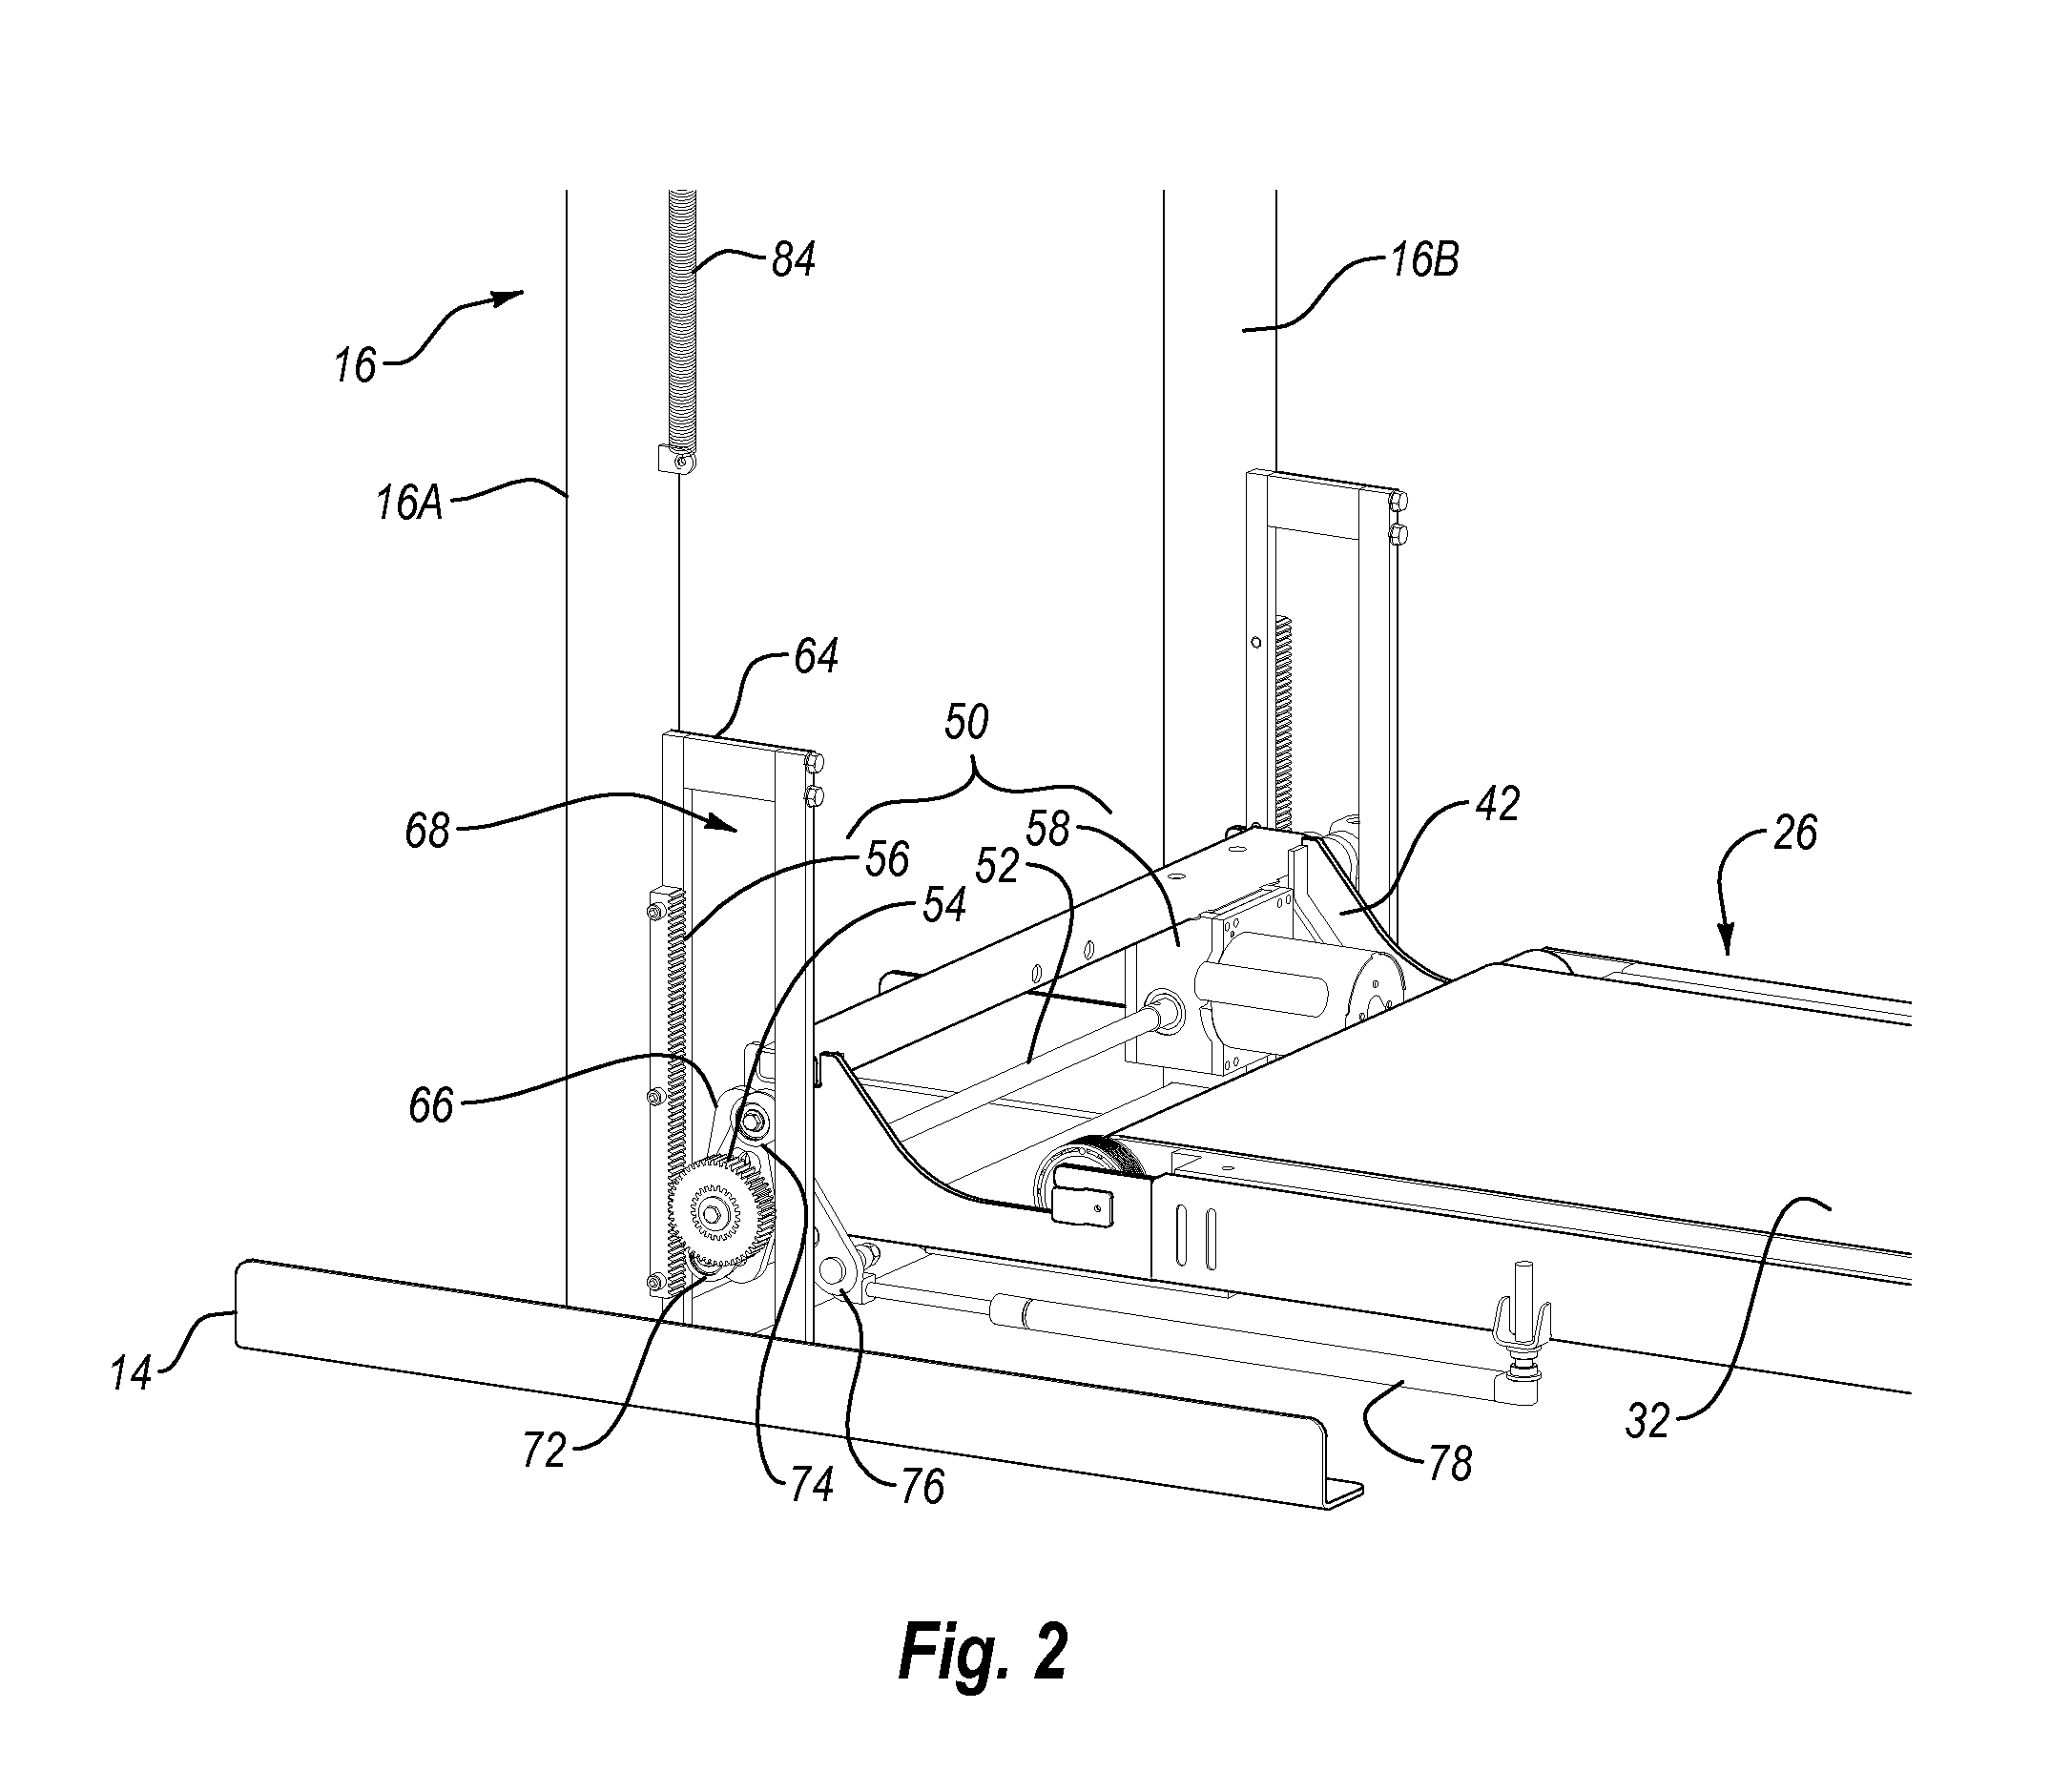 Exercise device with rack and pinion incline adjusting mechanism